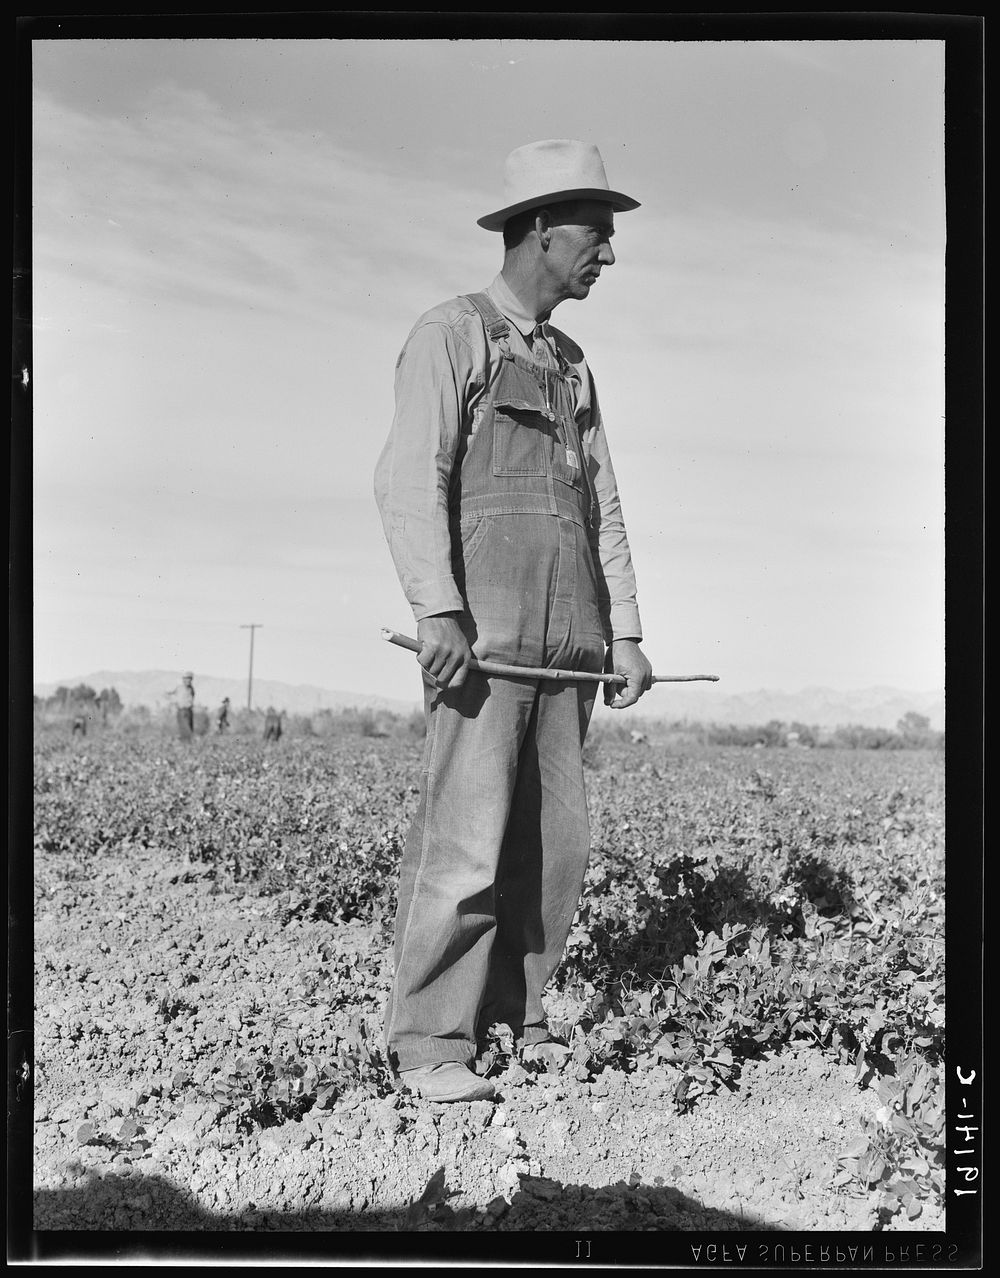 Row boss. Formerly a pea picker. Near Calipatria, California. Sourced from the Library of Congress.